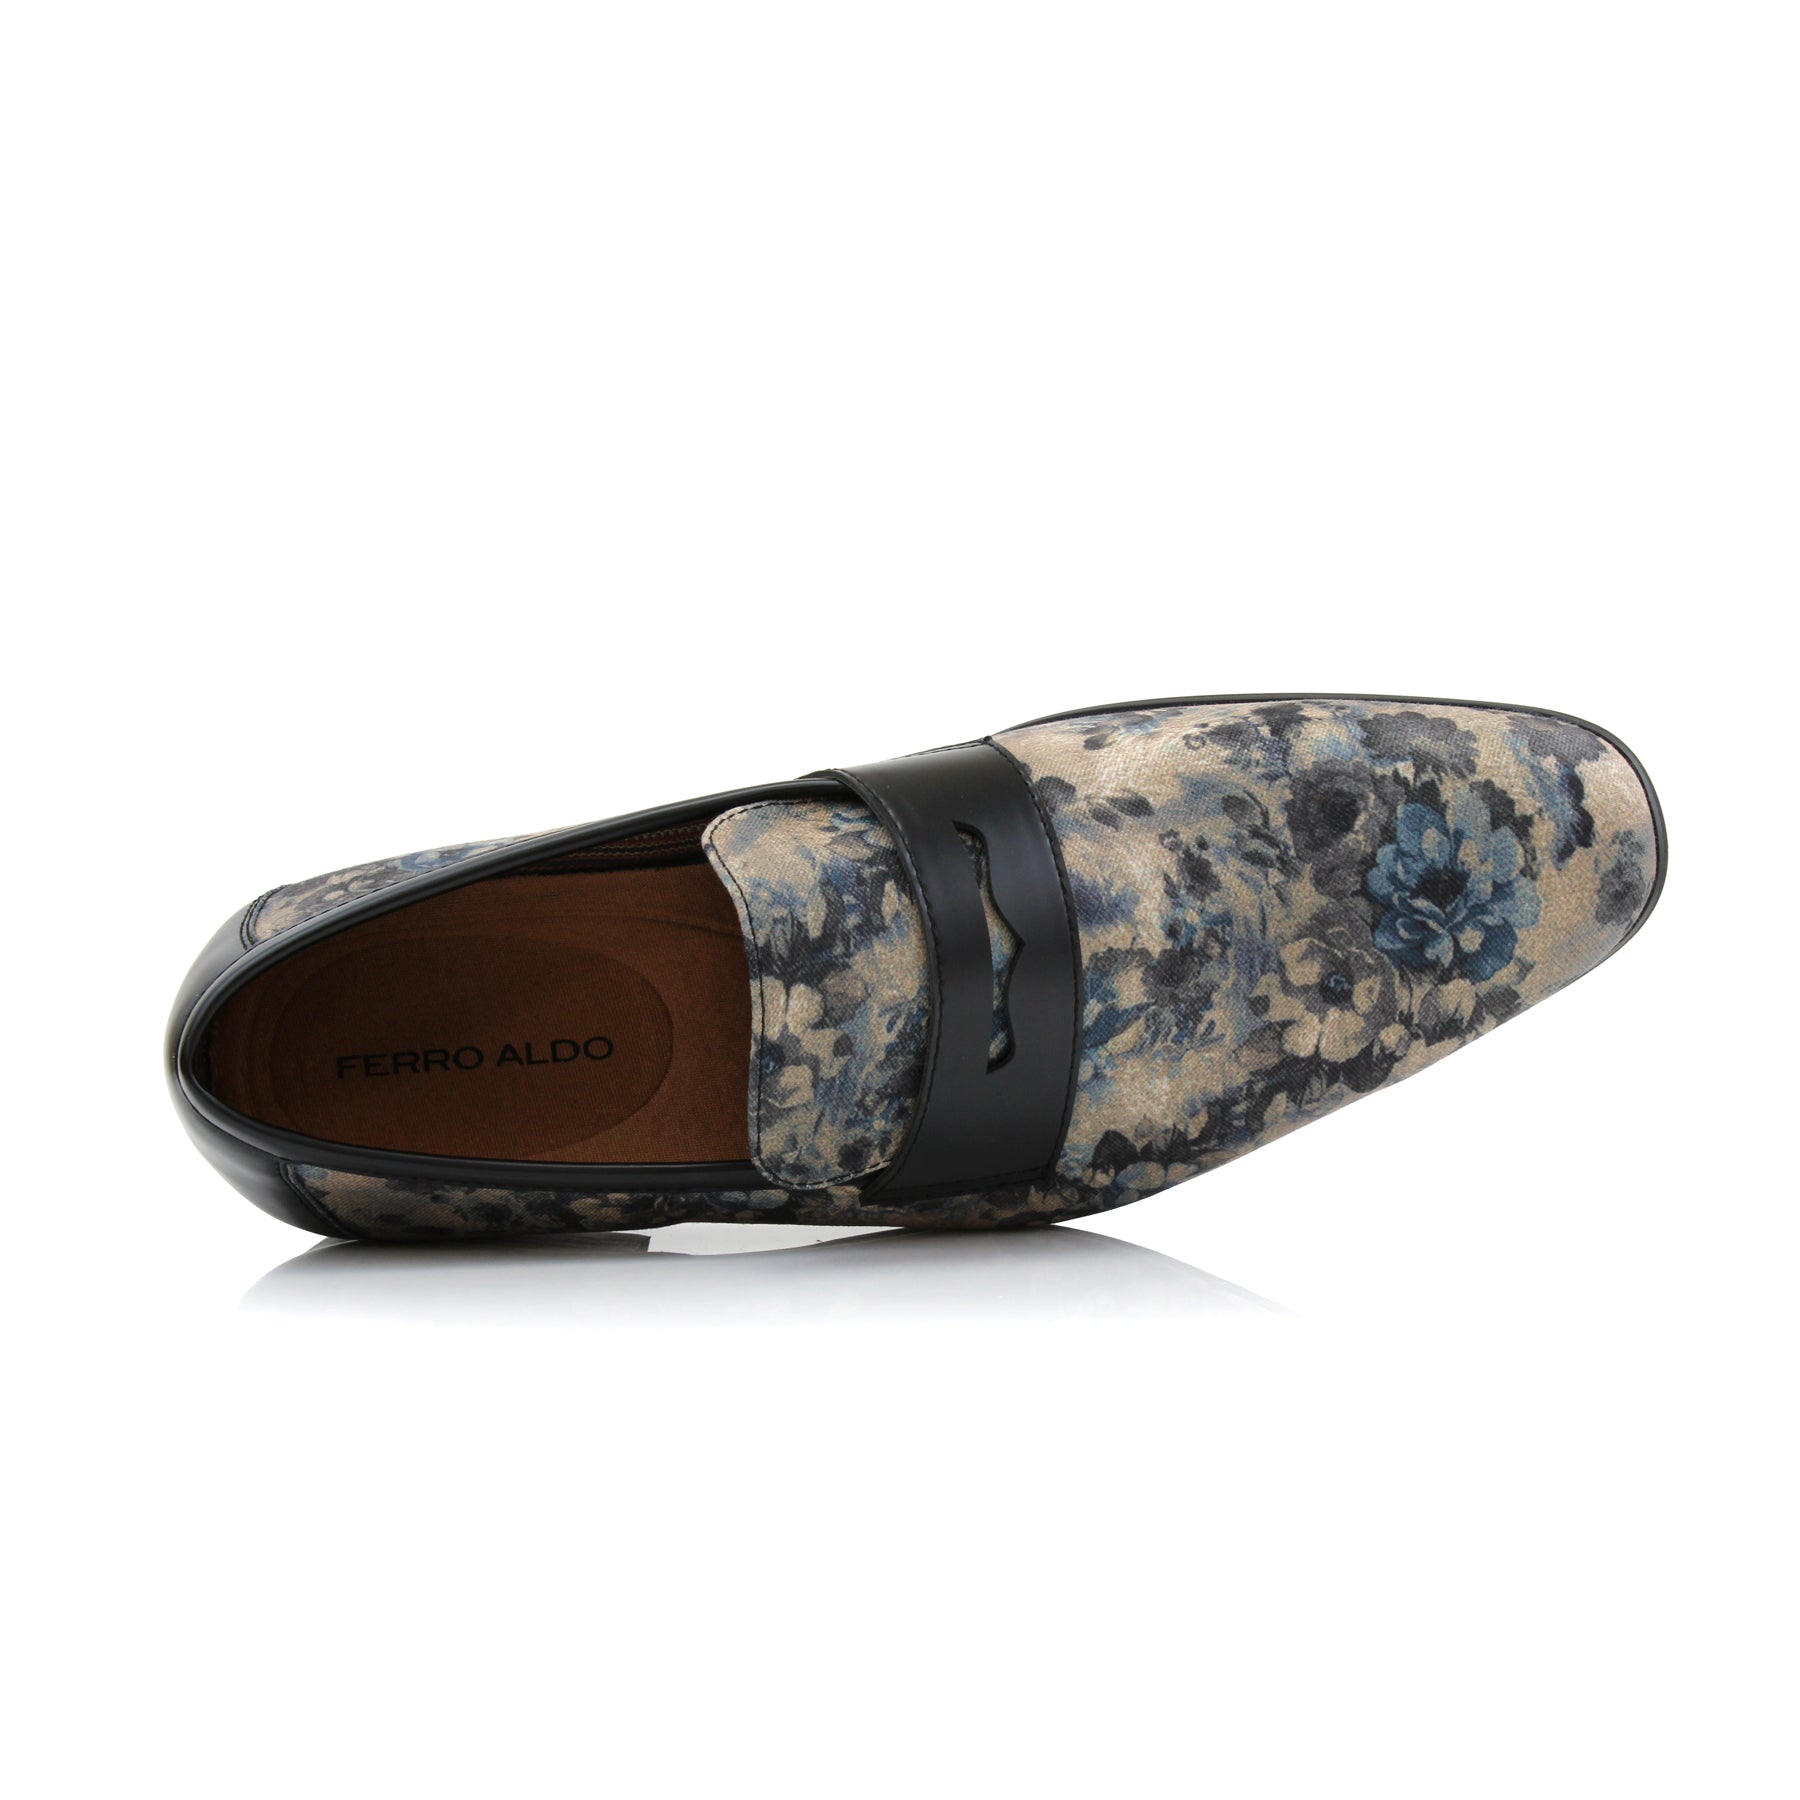 Floral Loafers | Sidney by Ferro Aldo | Conal Footwear | Top-Down Angle View